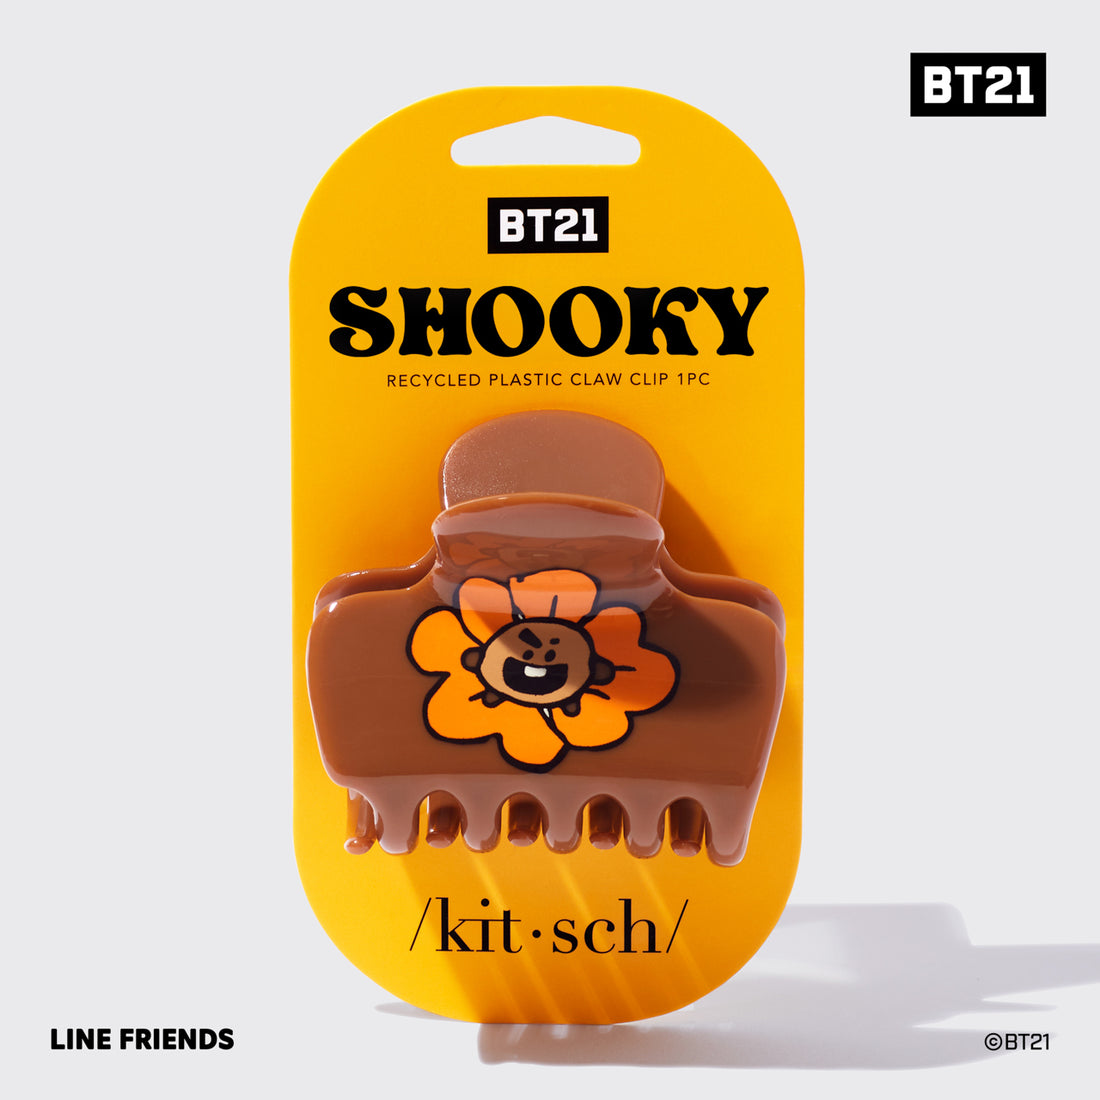 BT21 x Kitsch Recycled Plastic Puffy Claw Clip 1pc - Shooky